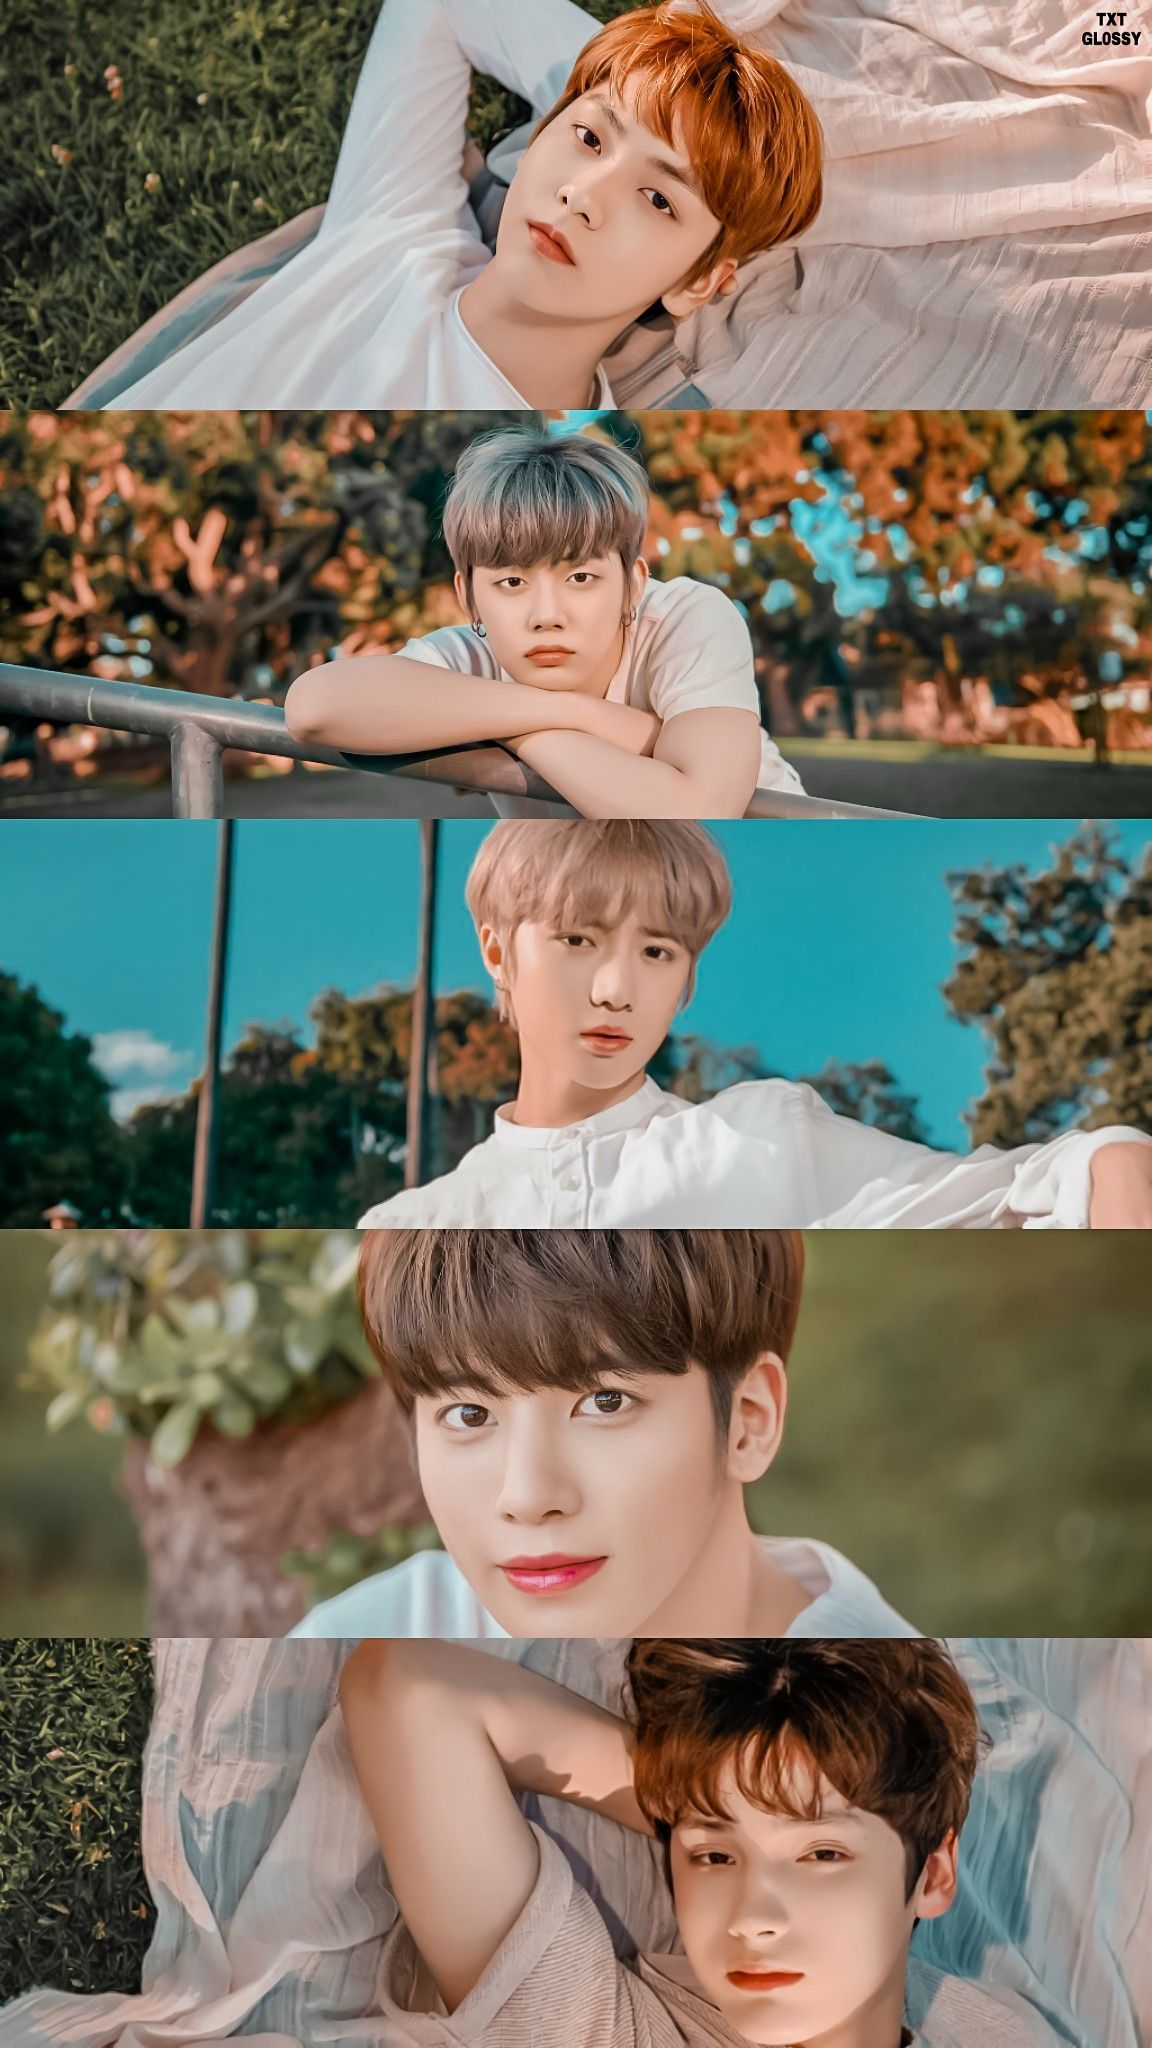 TXT FIRST PHOTOBOOK H:OUR SPOT wallpaper. Spotted wallpaper, Photo book, Txt